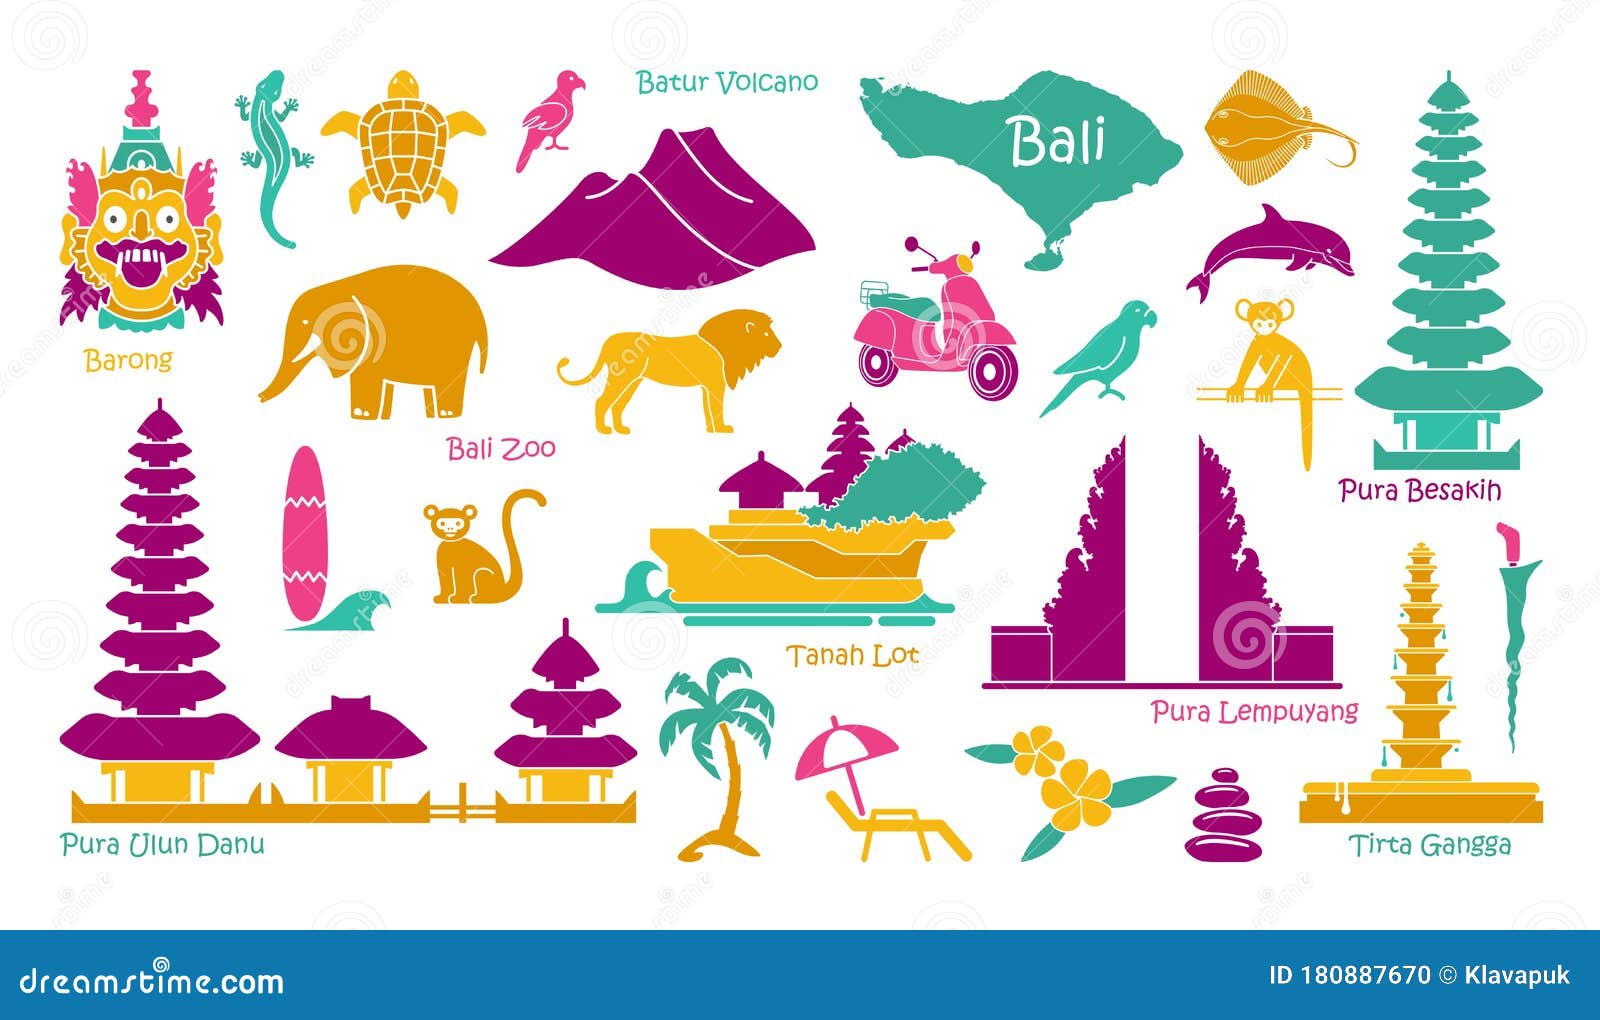 Bali Gate Vector Art, Icons, and Graphics for Free Download